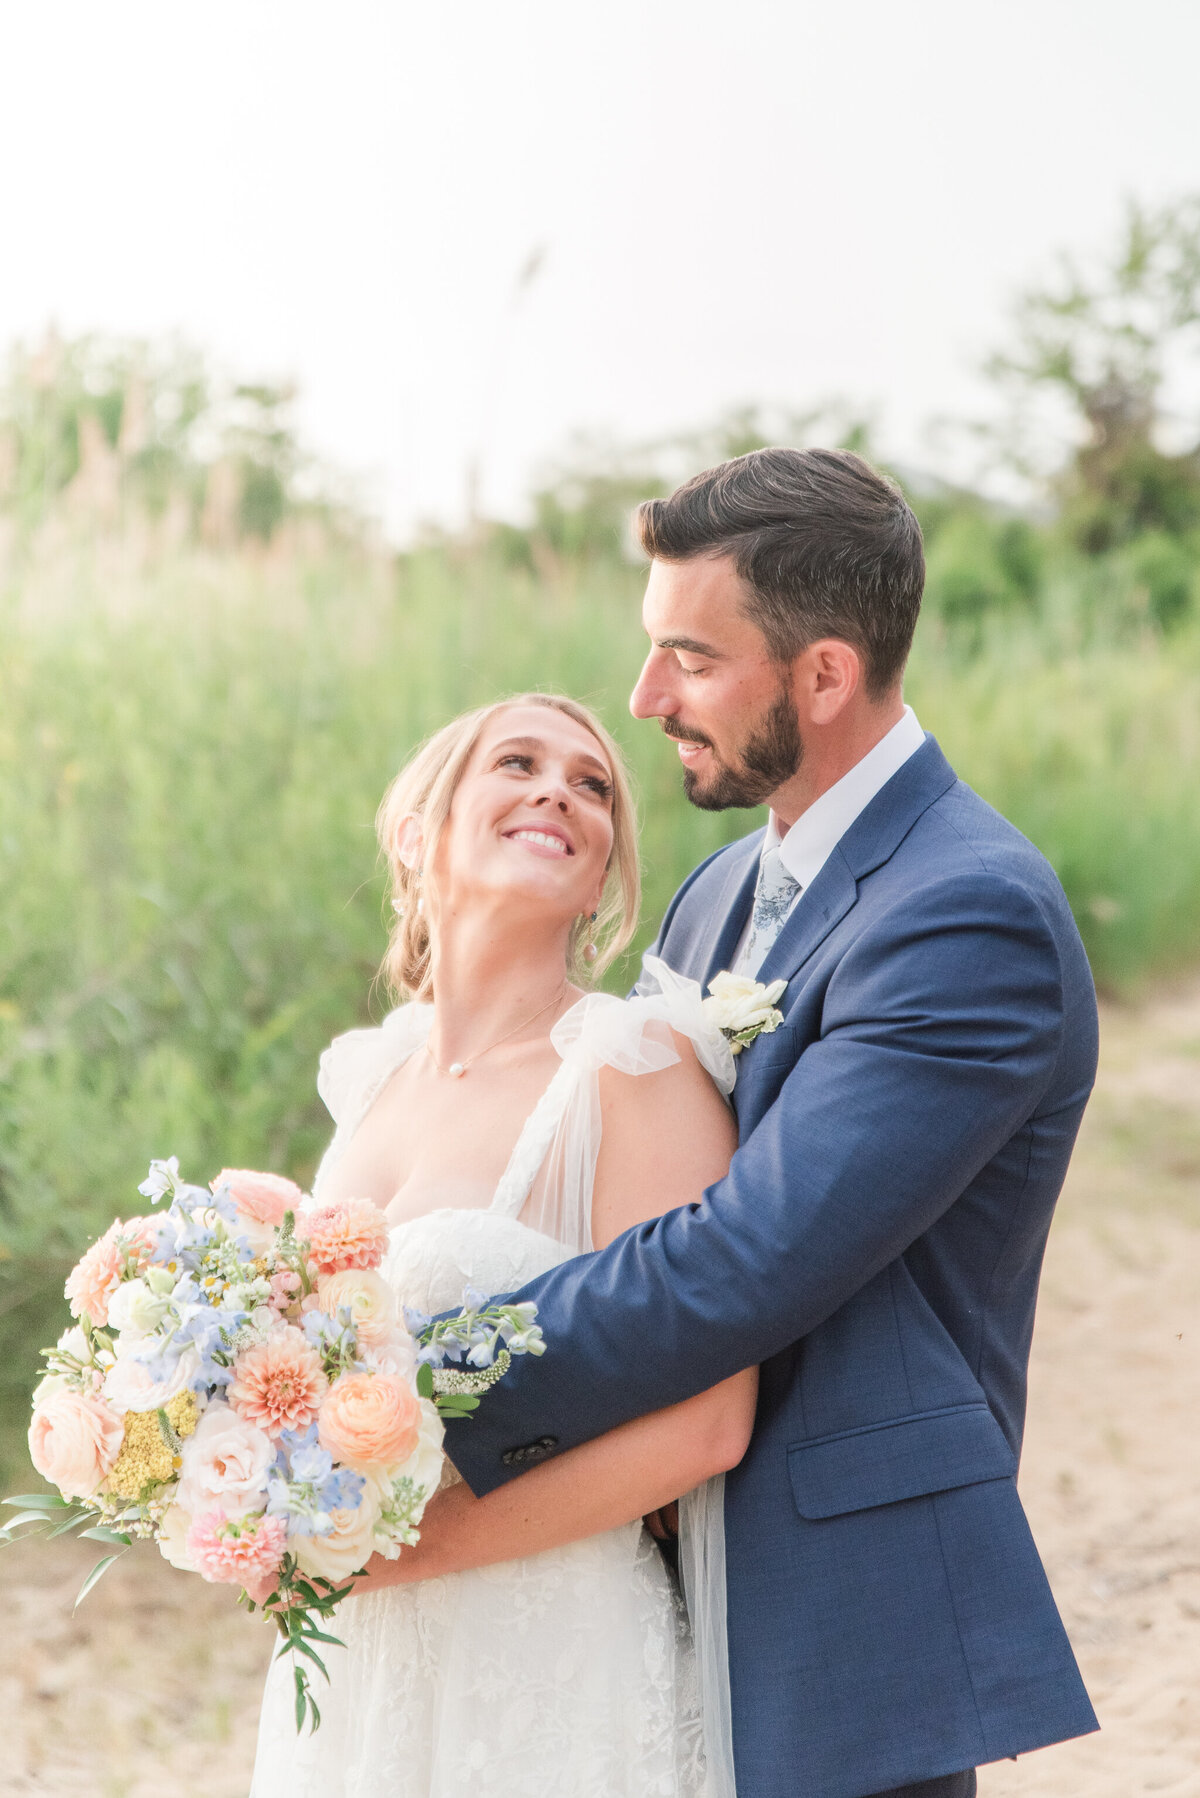 bride and groom looking into each other's eyes in a blue suit with floral tie and peach blue bouquet